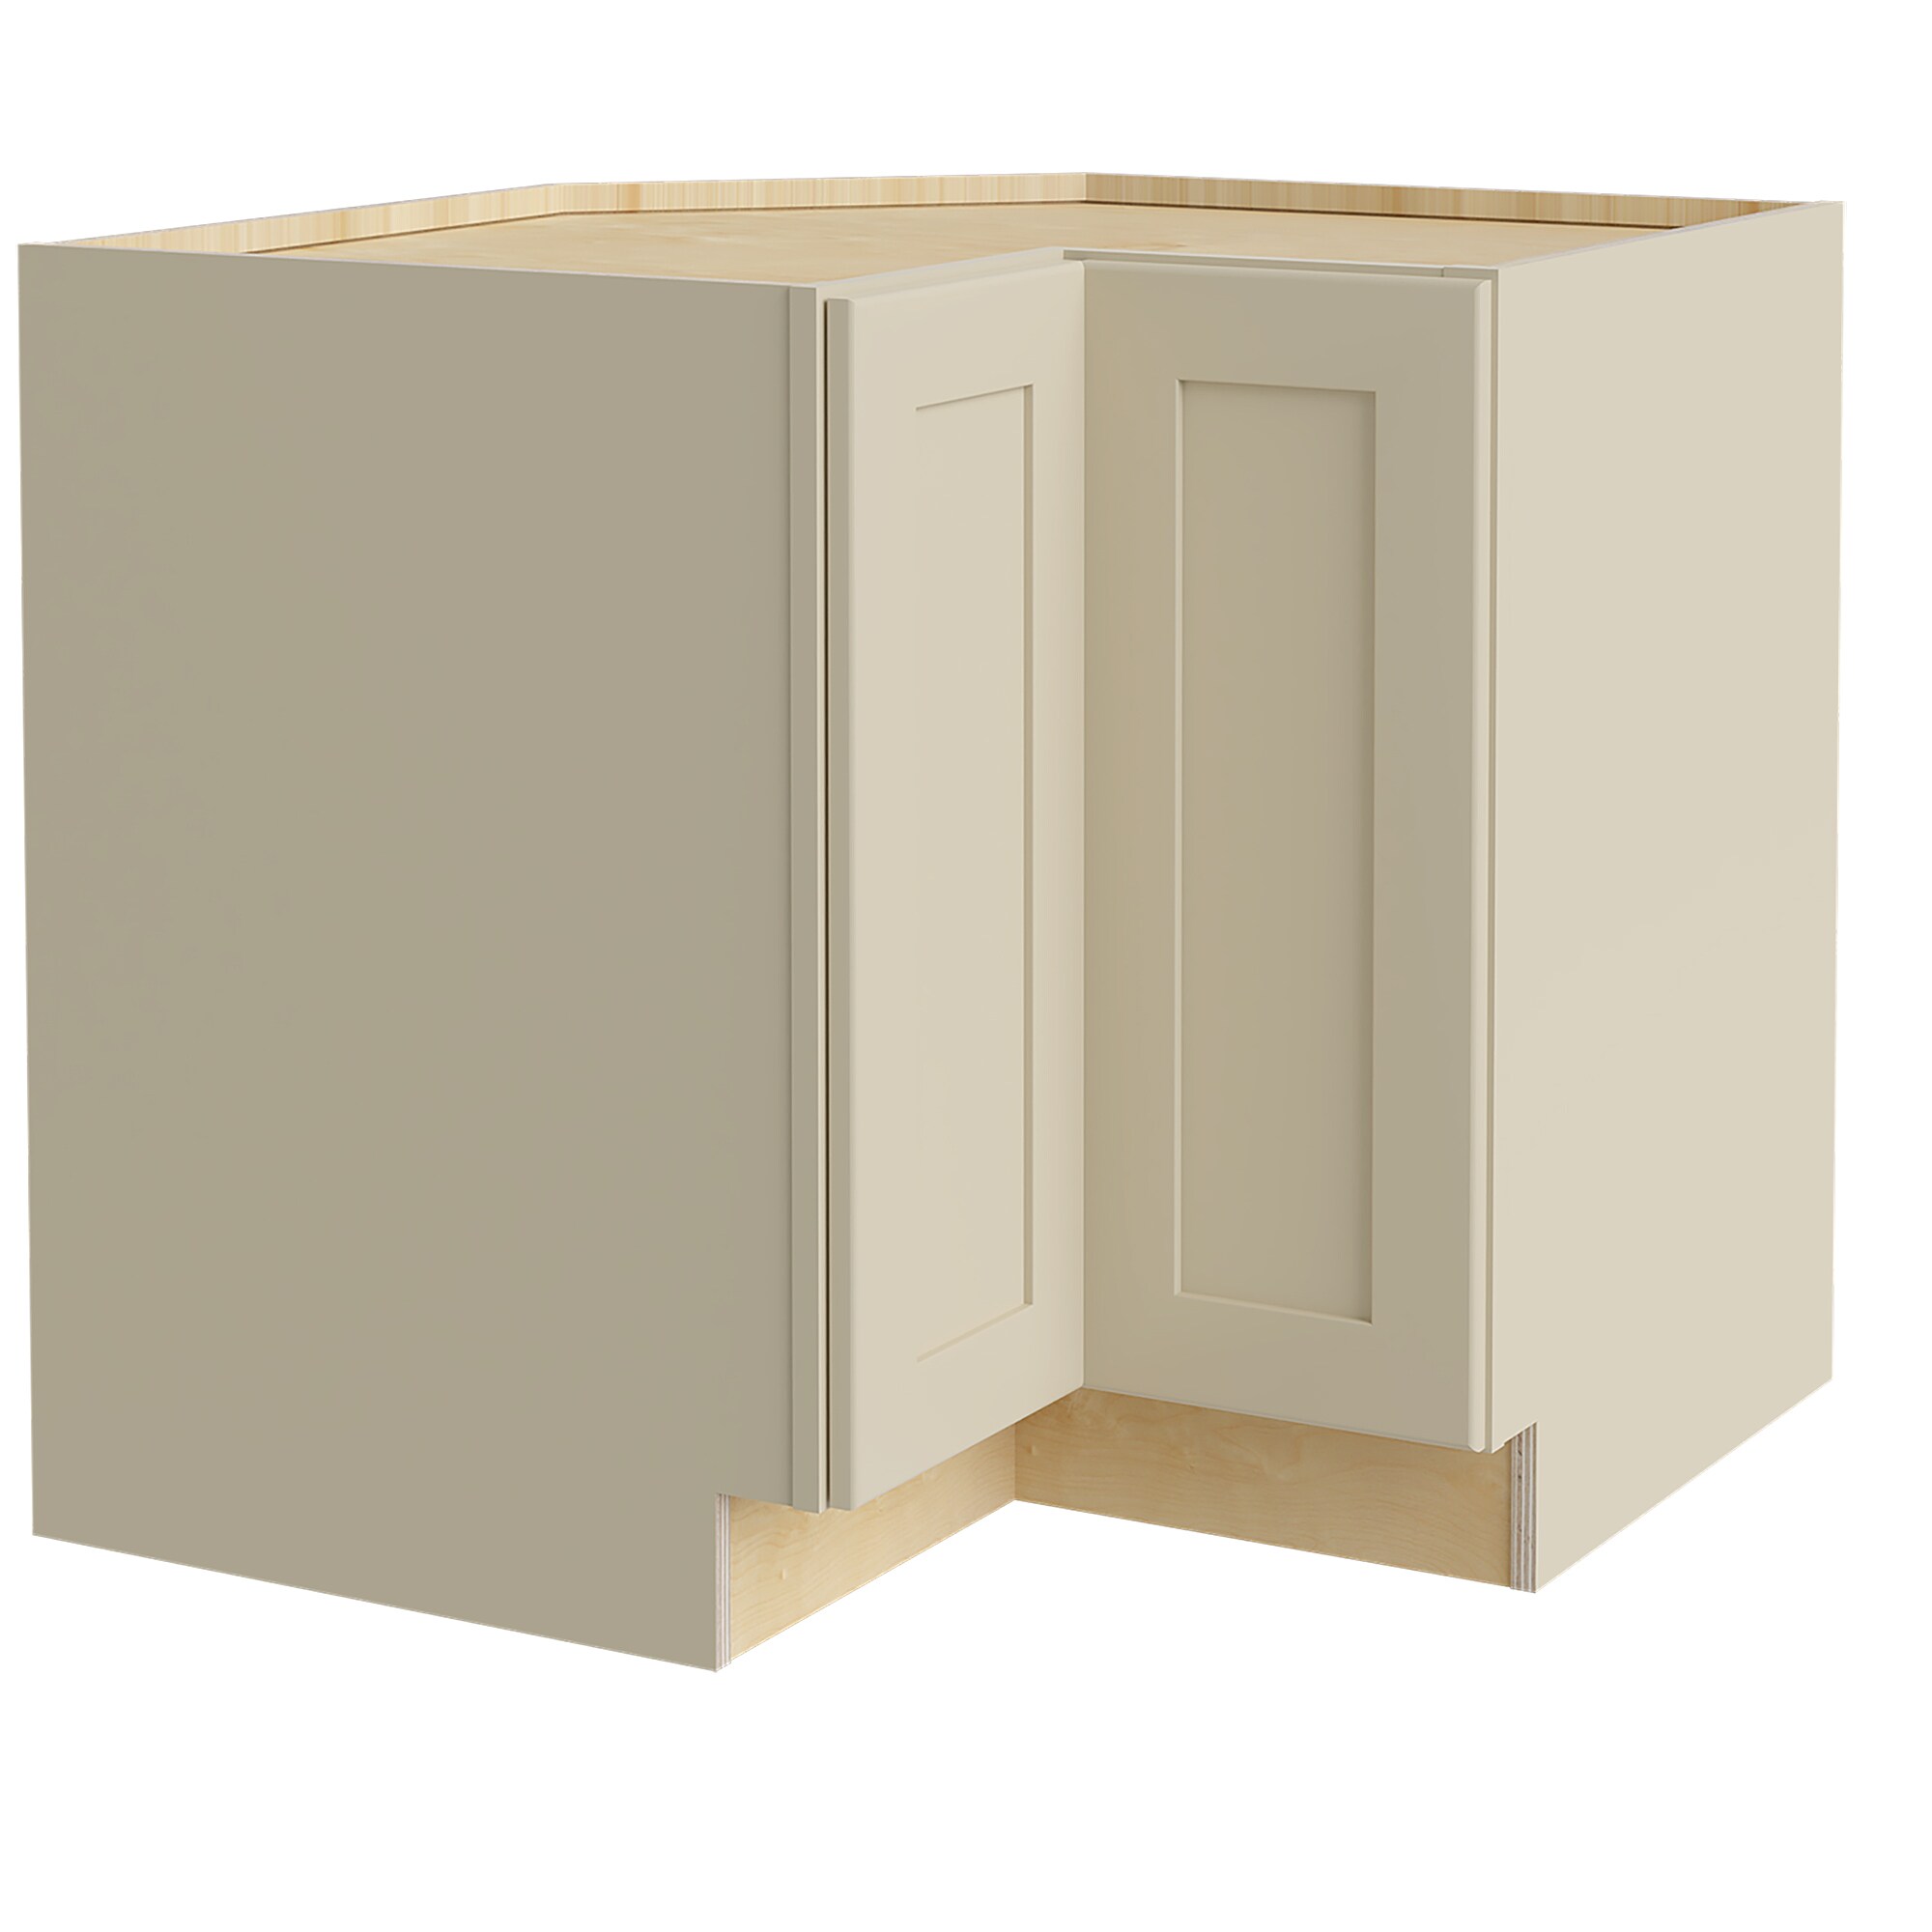 Luxxe Cabinetry 36-in W x 34.5-in H x 24-in D Norfolk Blended Cream Painted Corner Base Fully Assembled Semi-custom Cabinet in Off-White | EZR36L-NBC